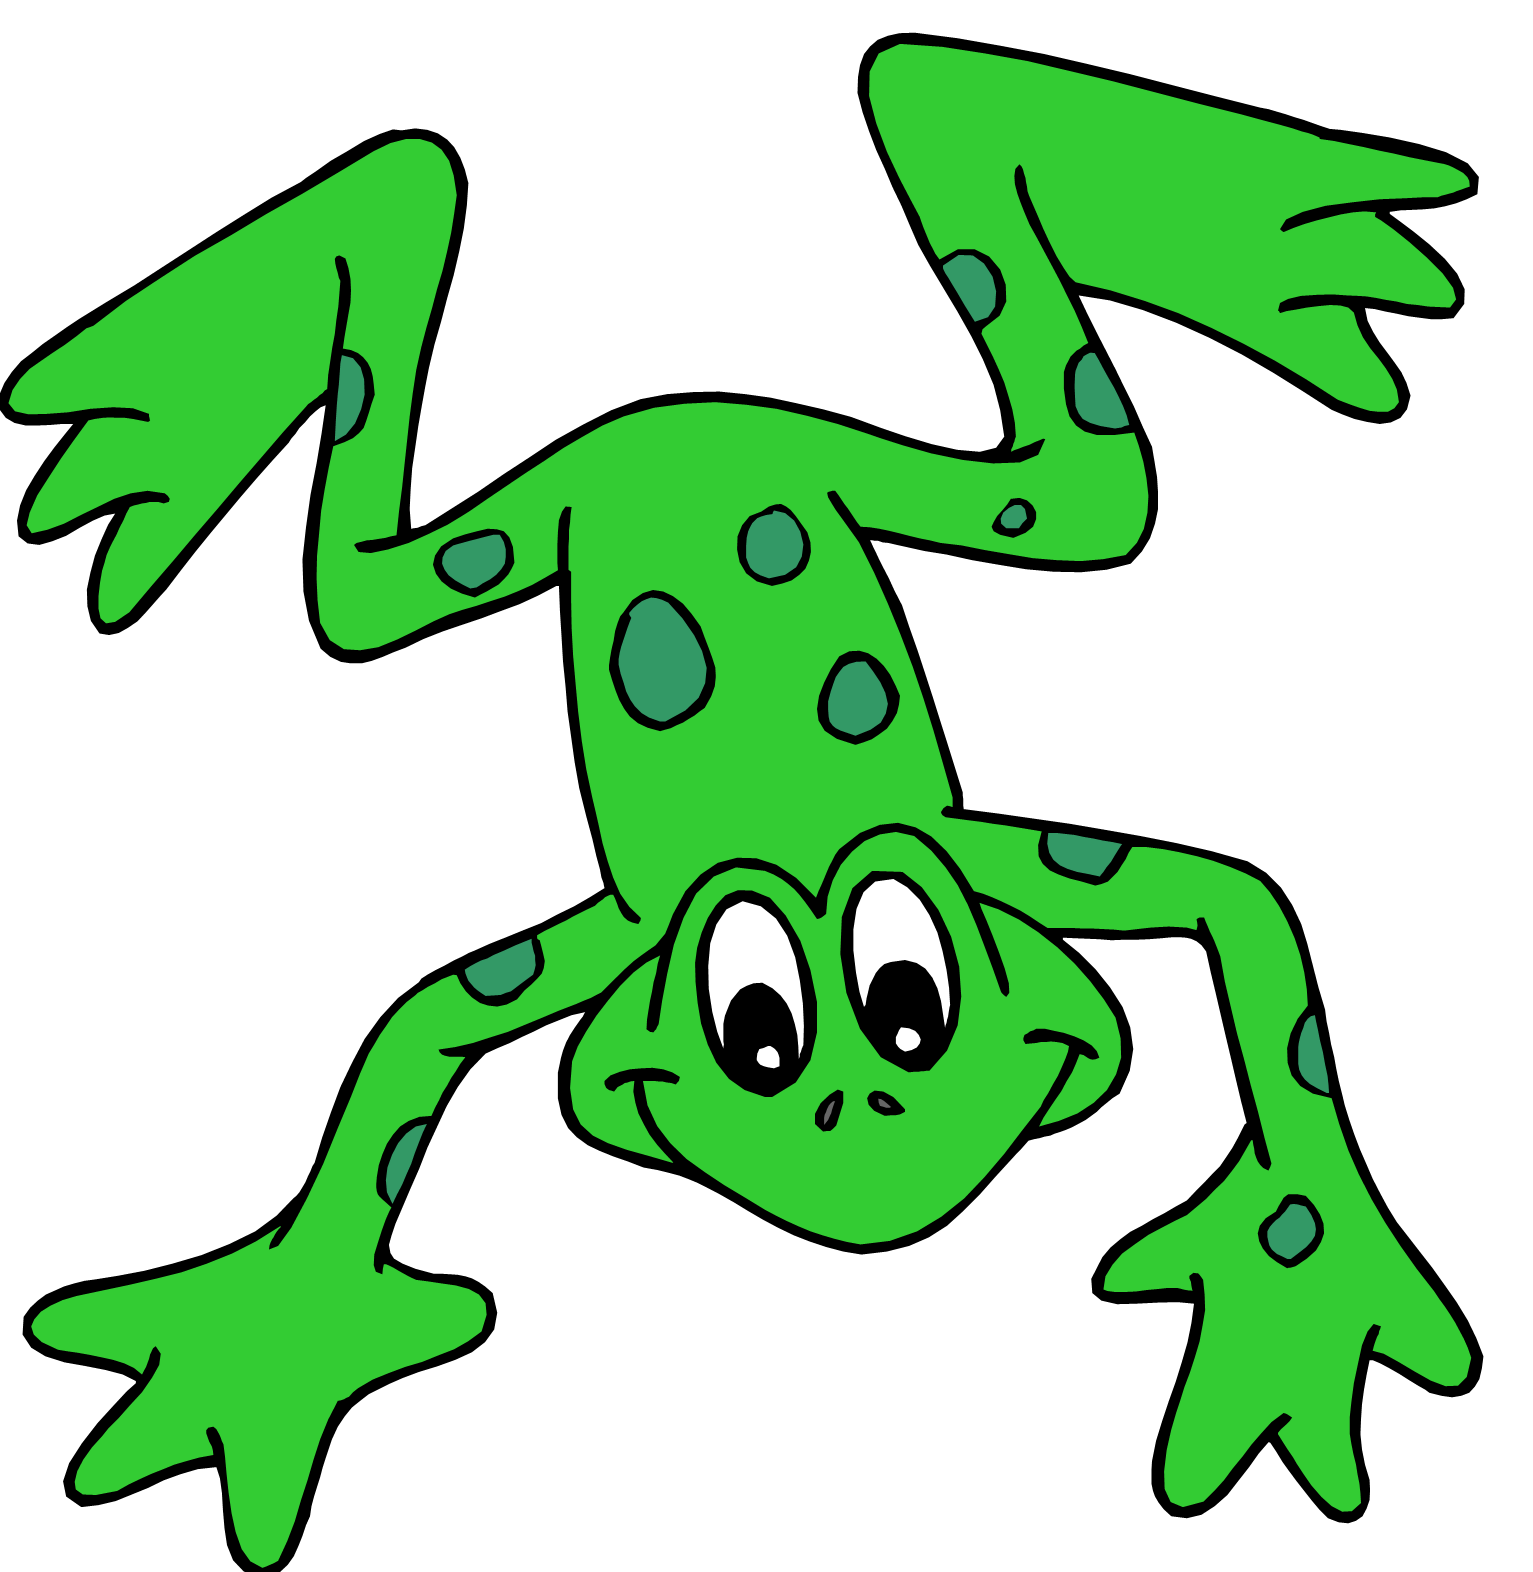 Jump clipart hop. Image of hopping frog